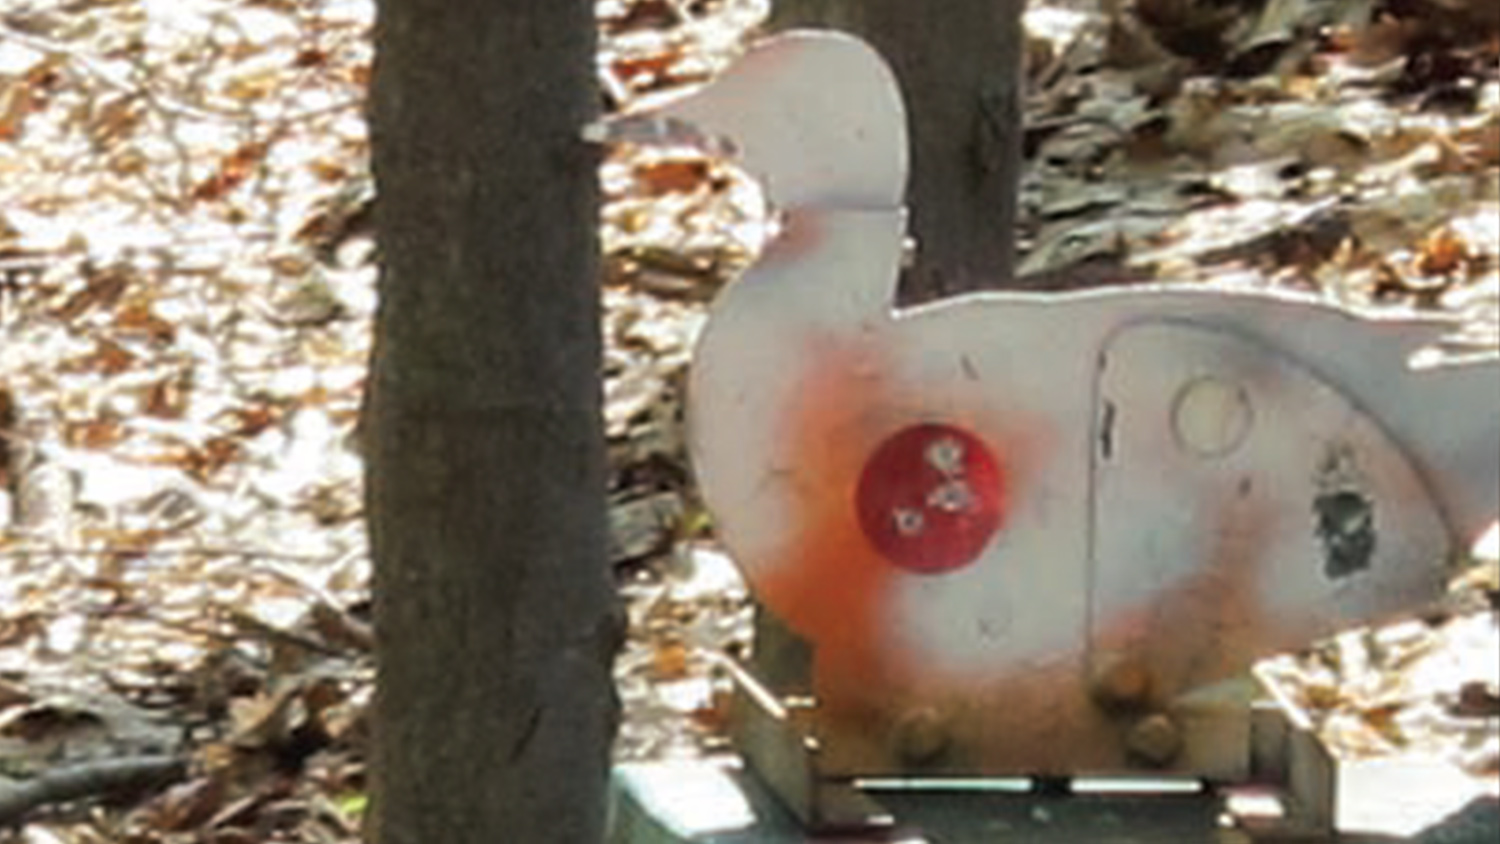 Typical field target